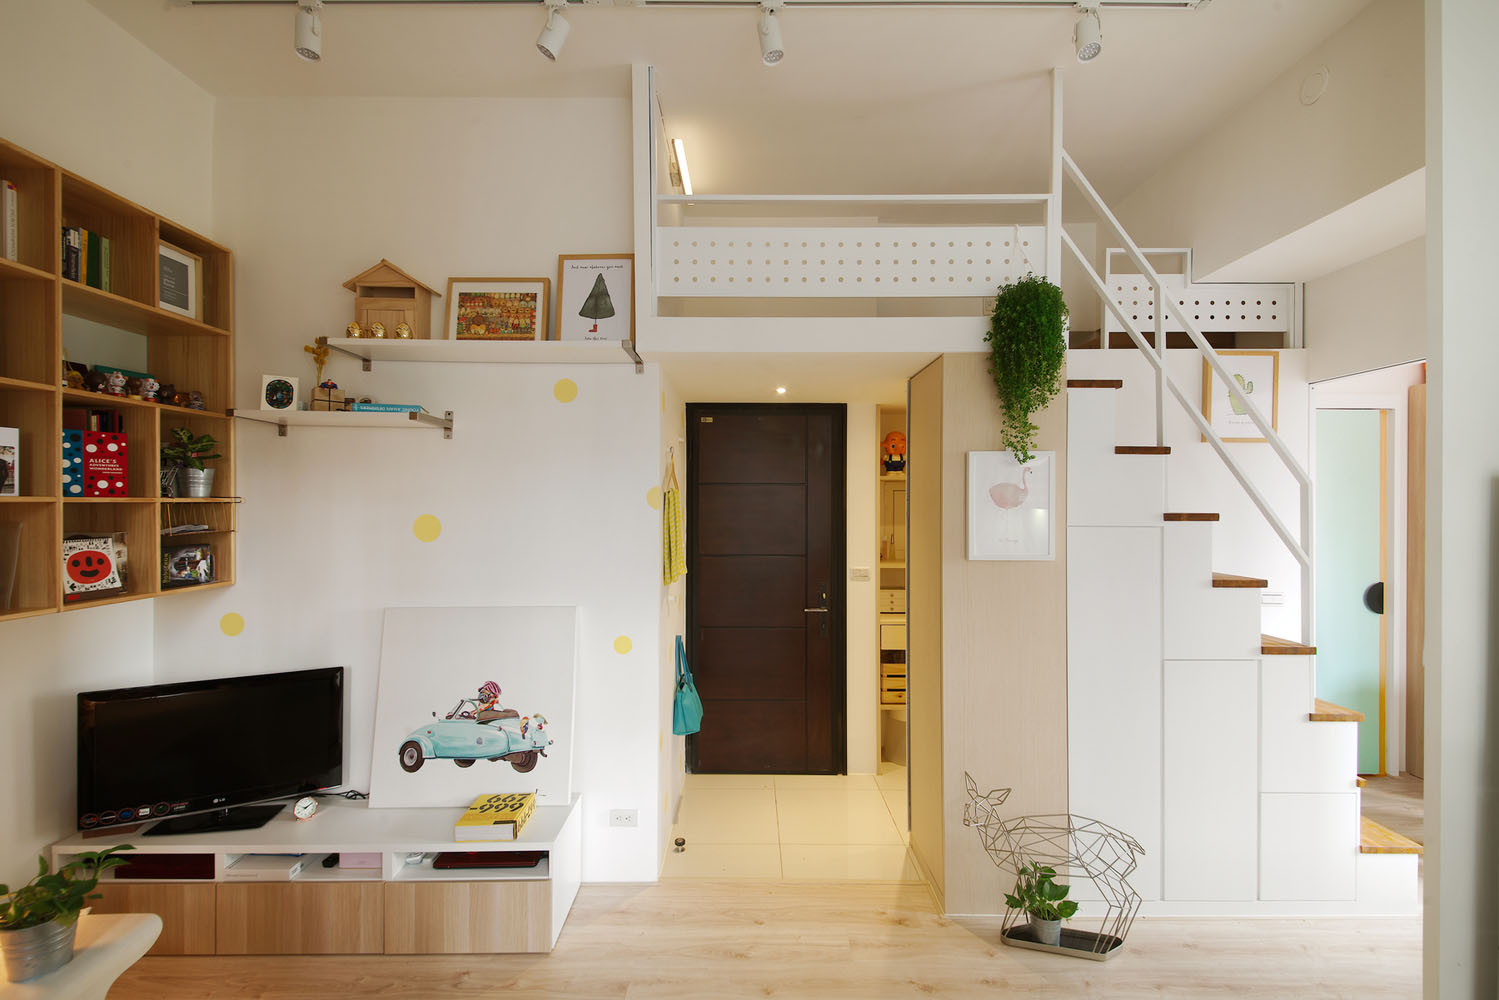 Redesigned Tiny Apartment With Loft Features A Brighter Open Space Idesignarch Interior Design Architecture Interior Decorating Emagazine,Tiny Very Small Kitchen Design Indian Style